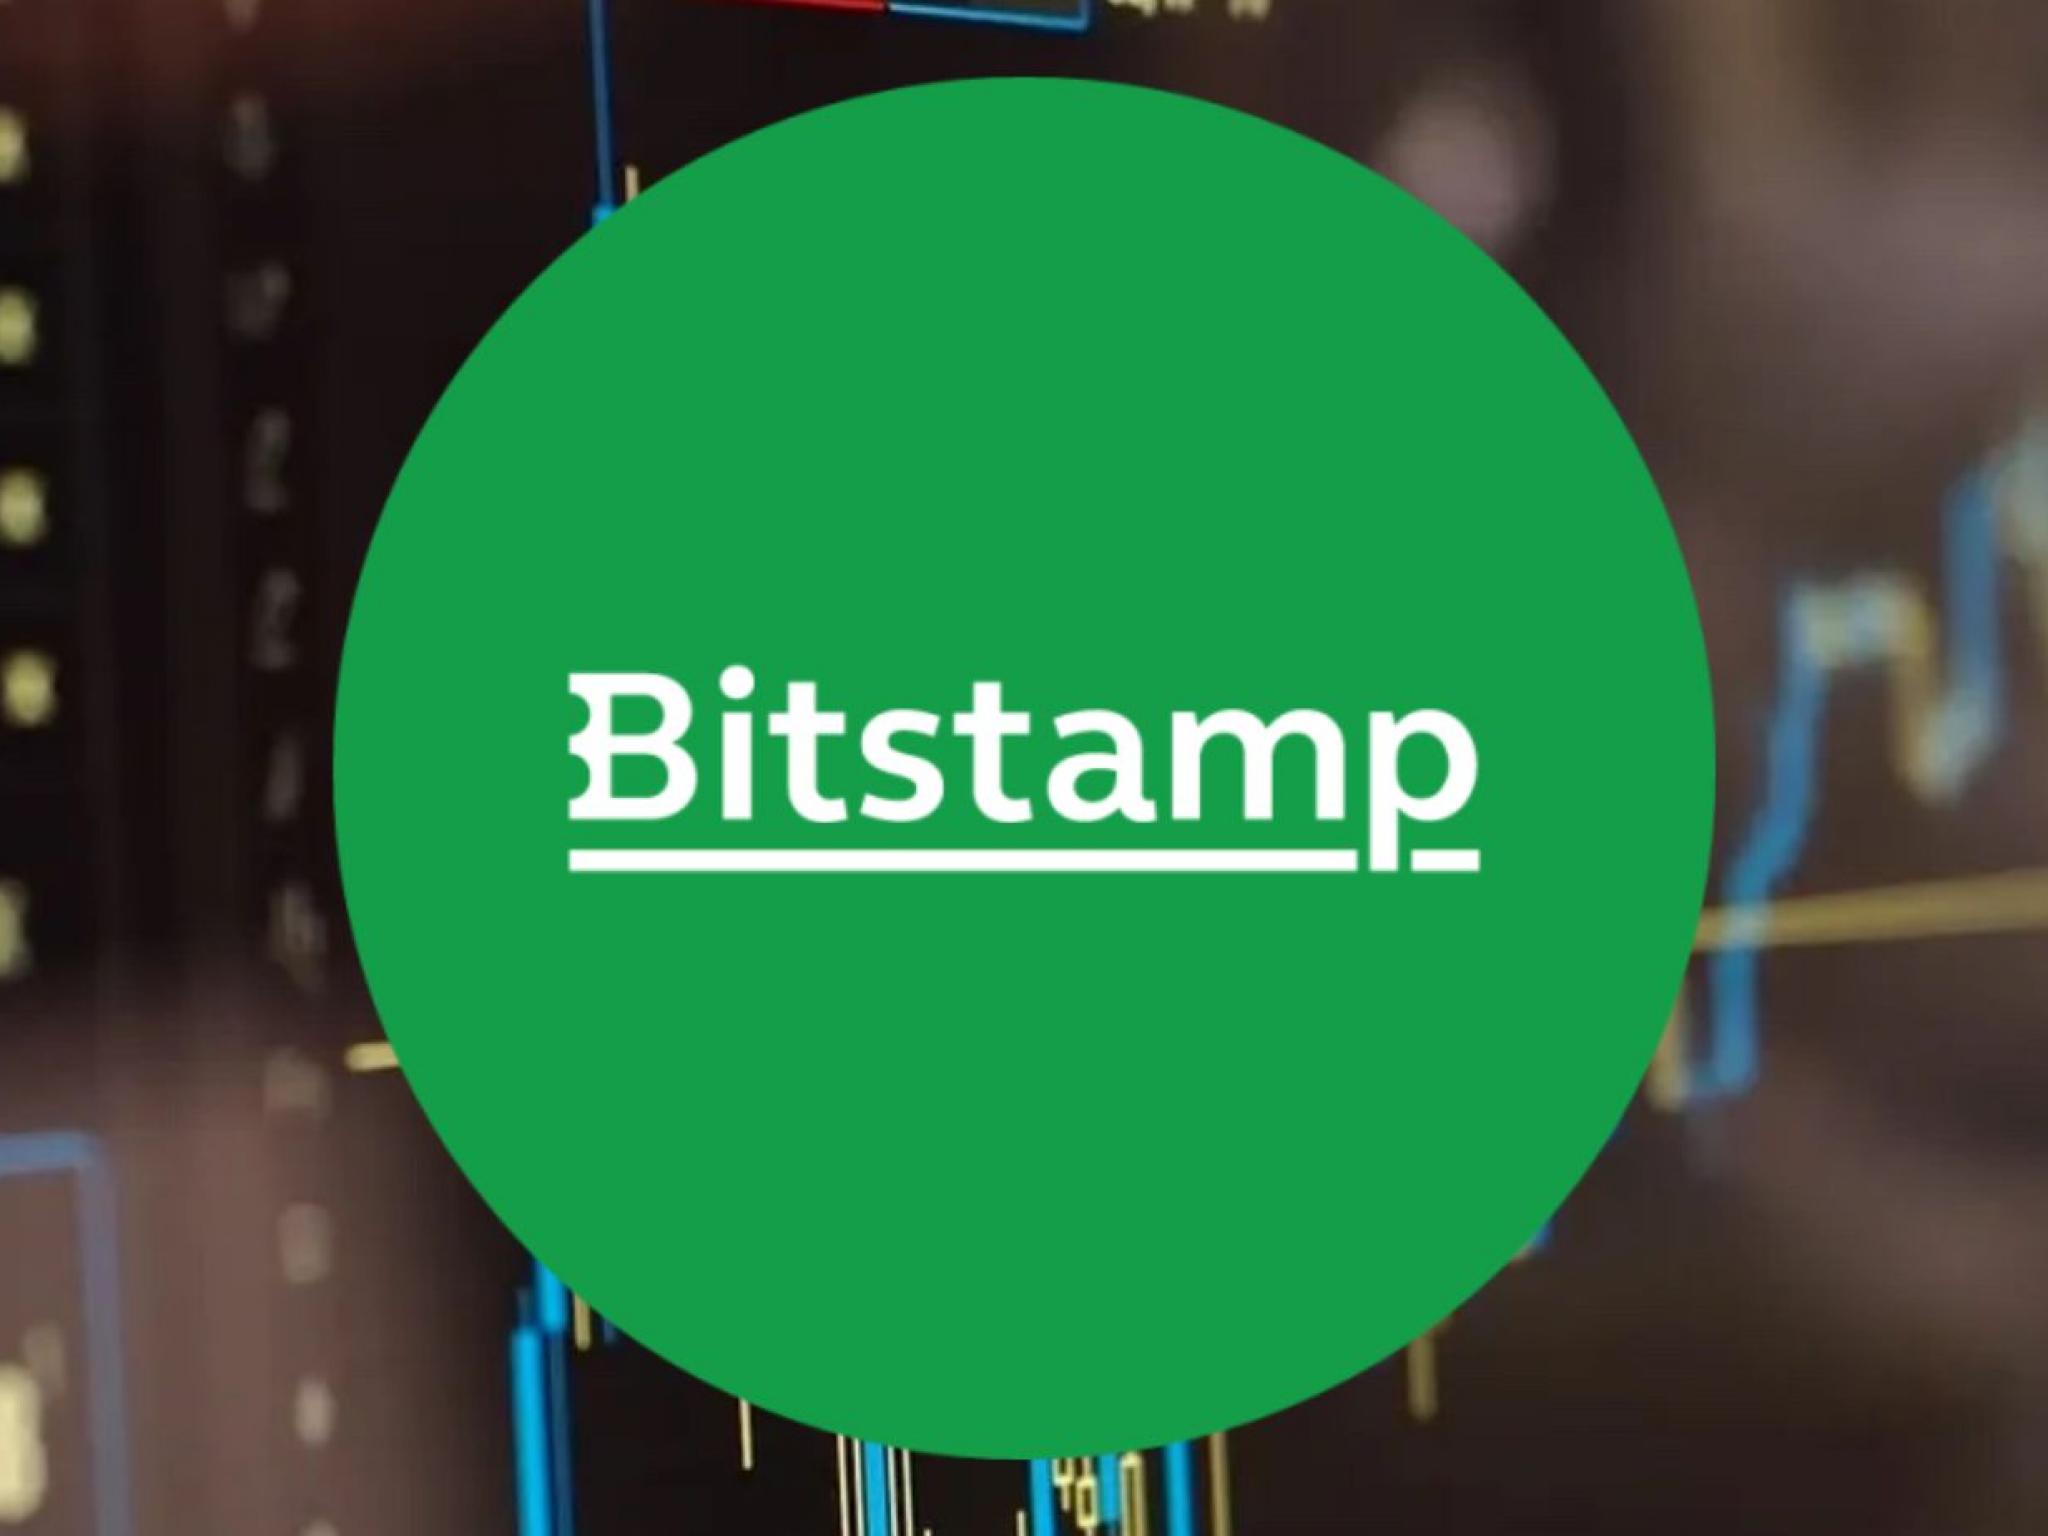  bitstamp-taps-galaxy-digital-to-raise-funds-for-expansion-efforts-in-europe-asia 